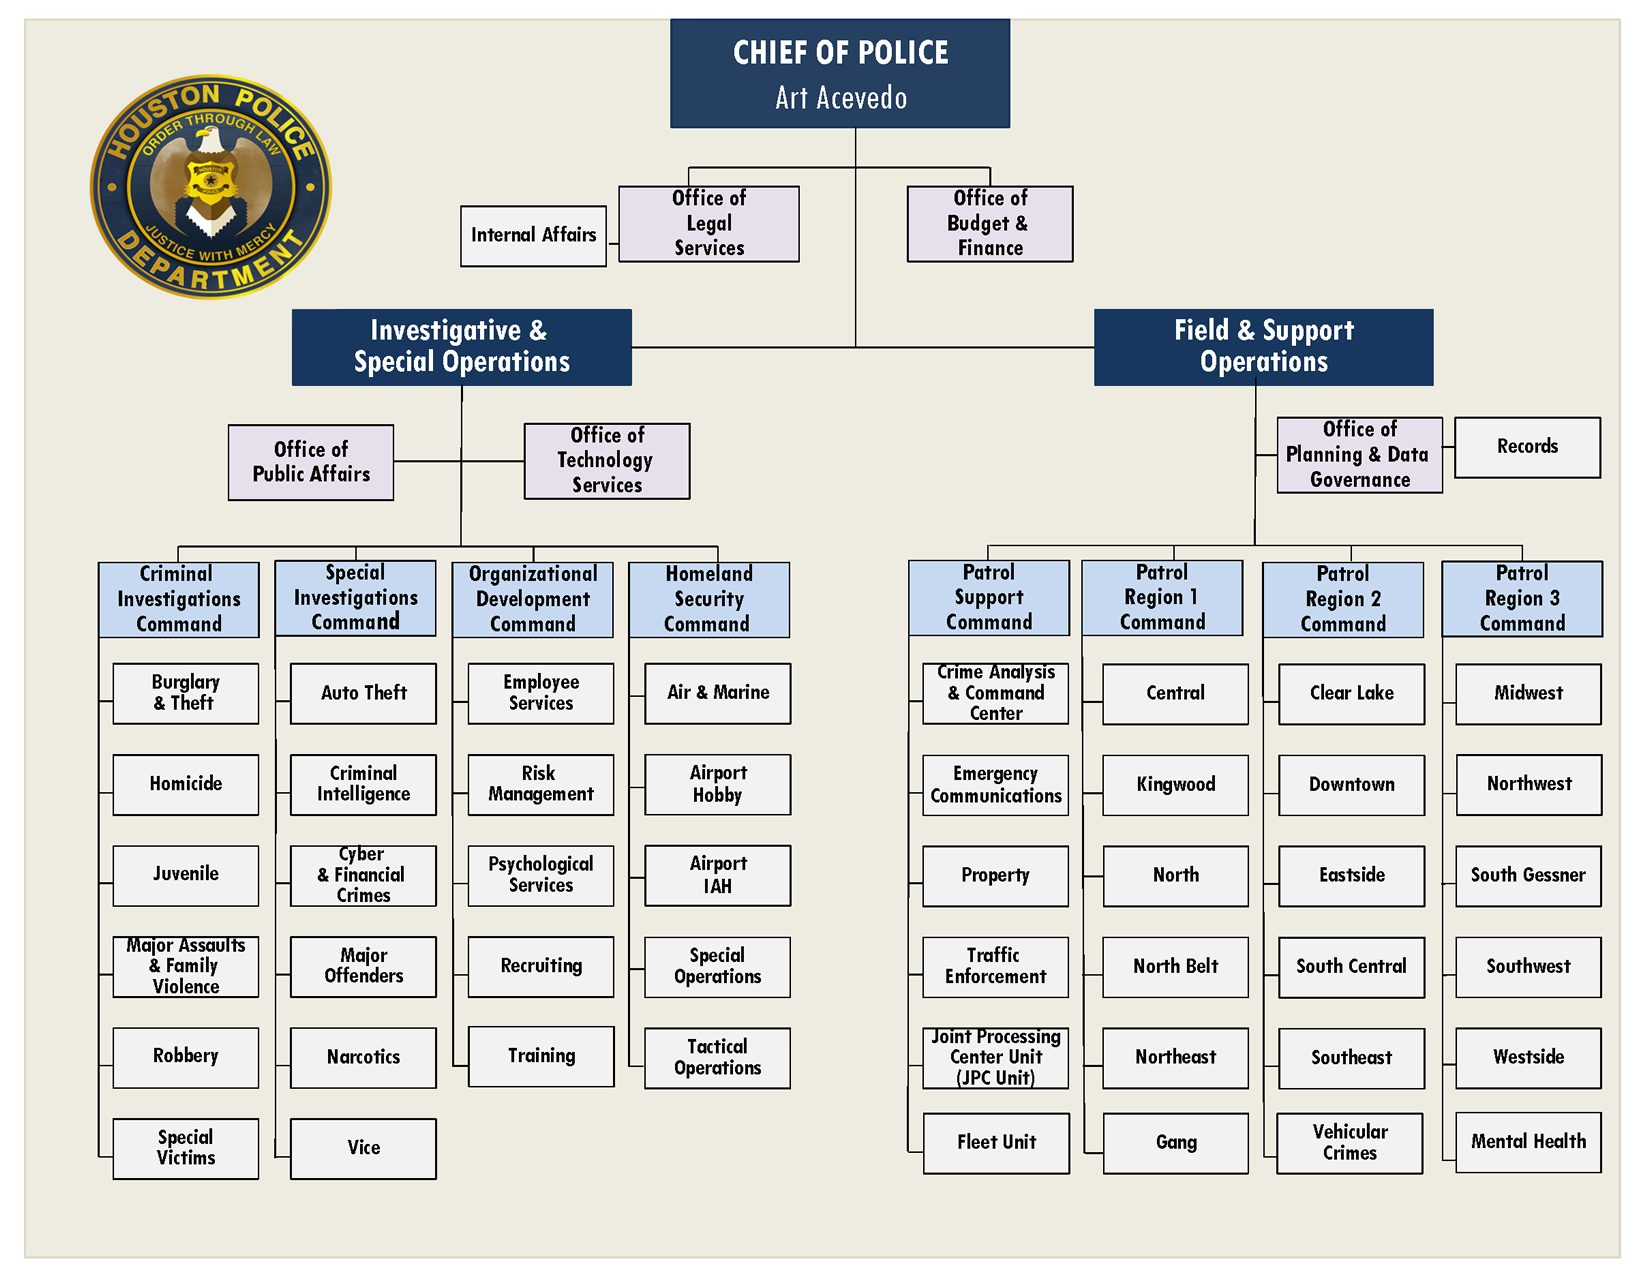 Texas Police Hierarchy Structure Texas Police Ranks | Images and Photos ...